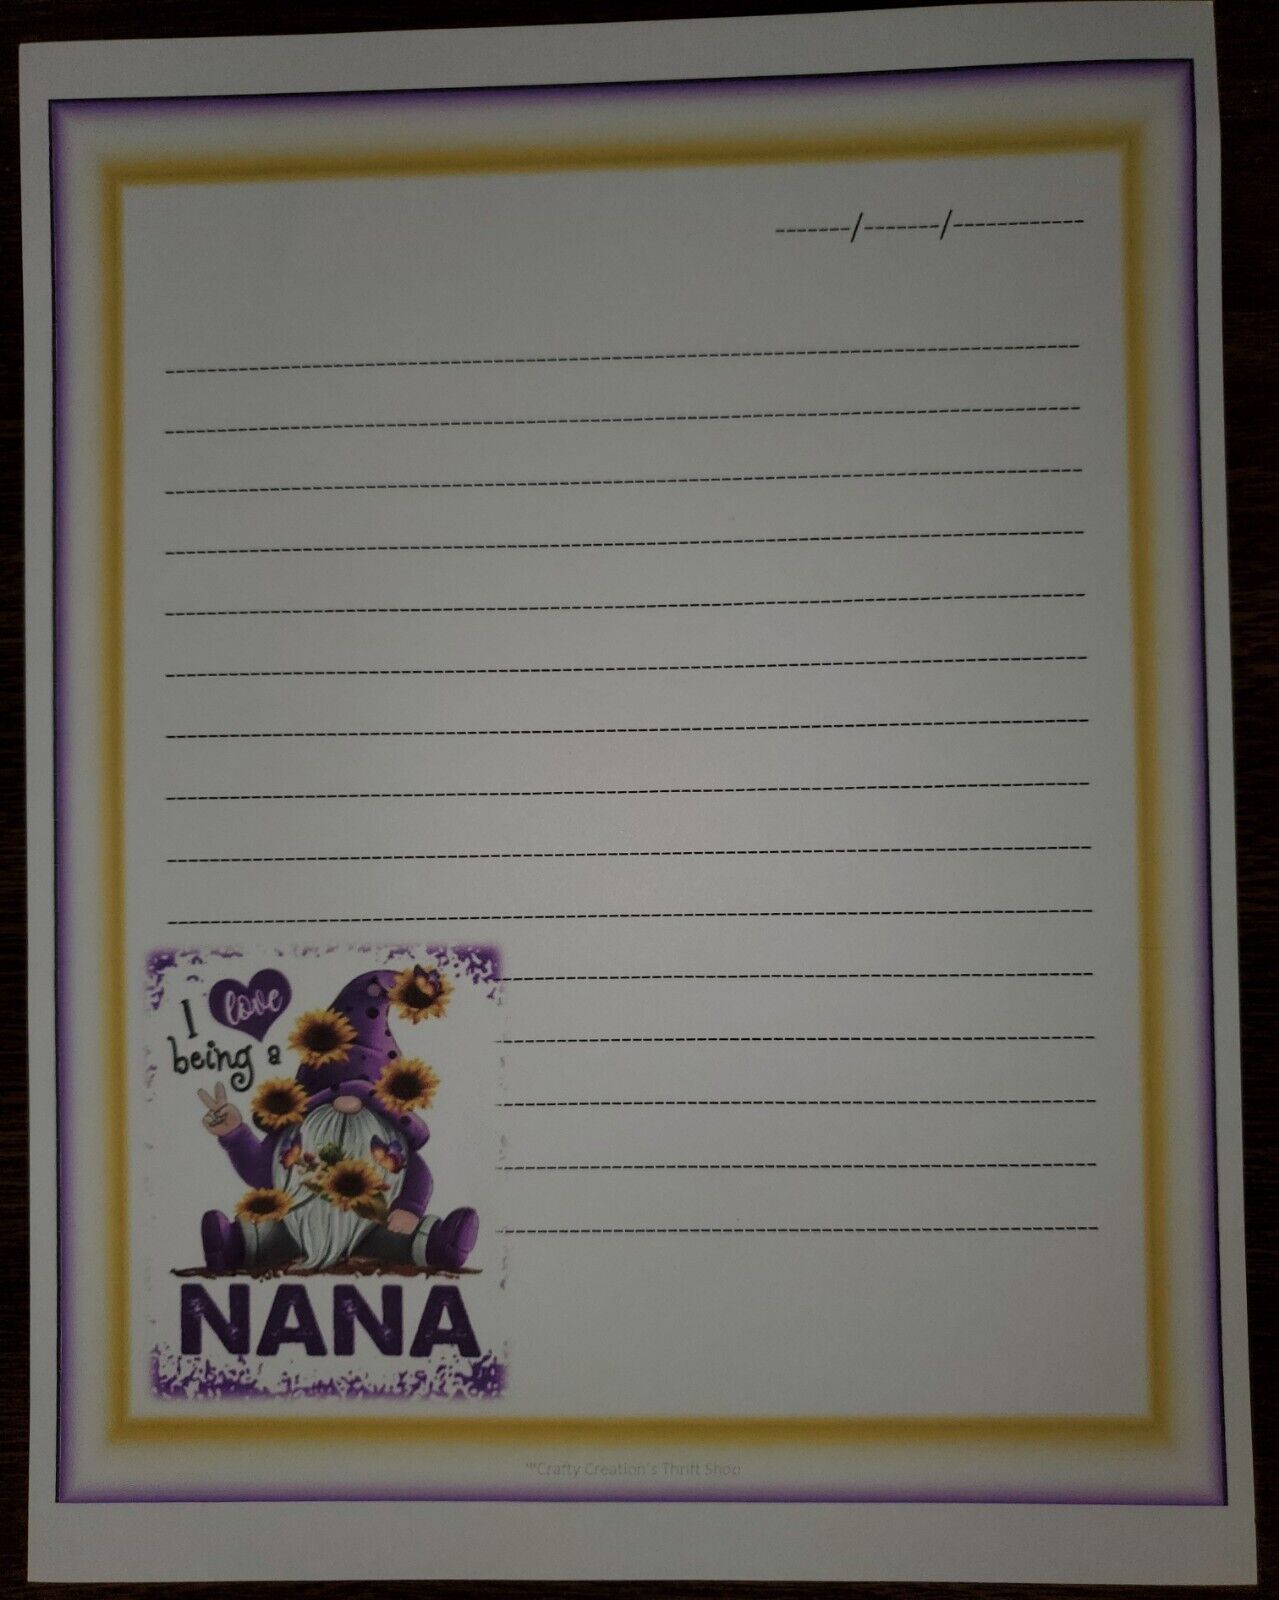 Gnome I love being a nana stationary paper (30 Sheets)  8 ¹/² x 11 